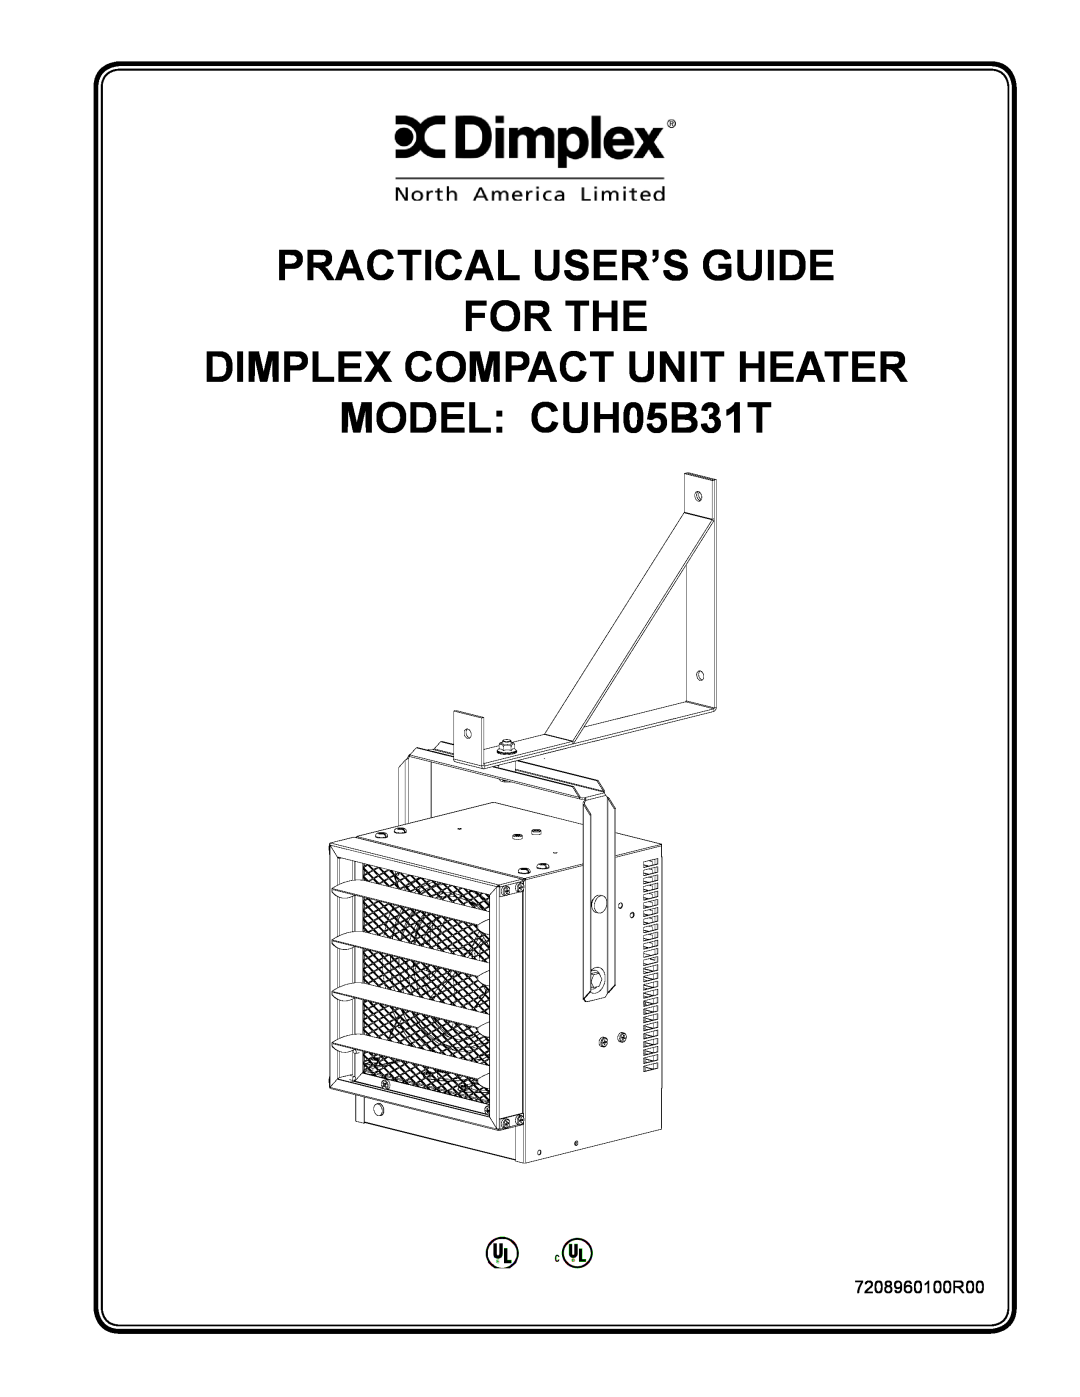 Dimplex manual Practical User’S Guide For The, DIMPLEX COMPACT UNIT HEATER MODEL CUH05B31T, 7208960100R00 